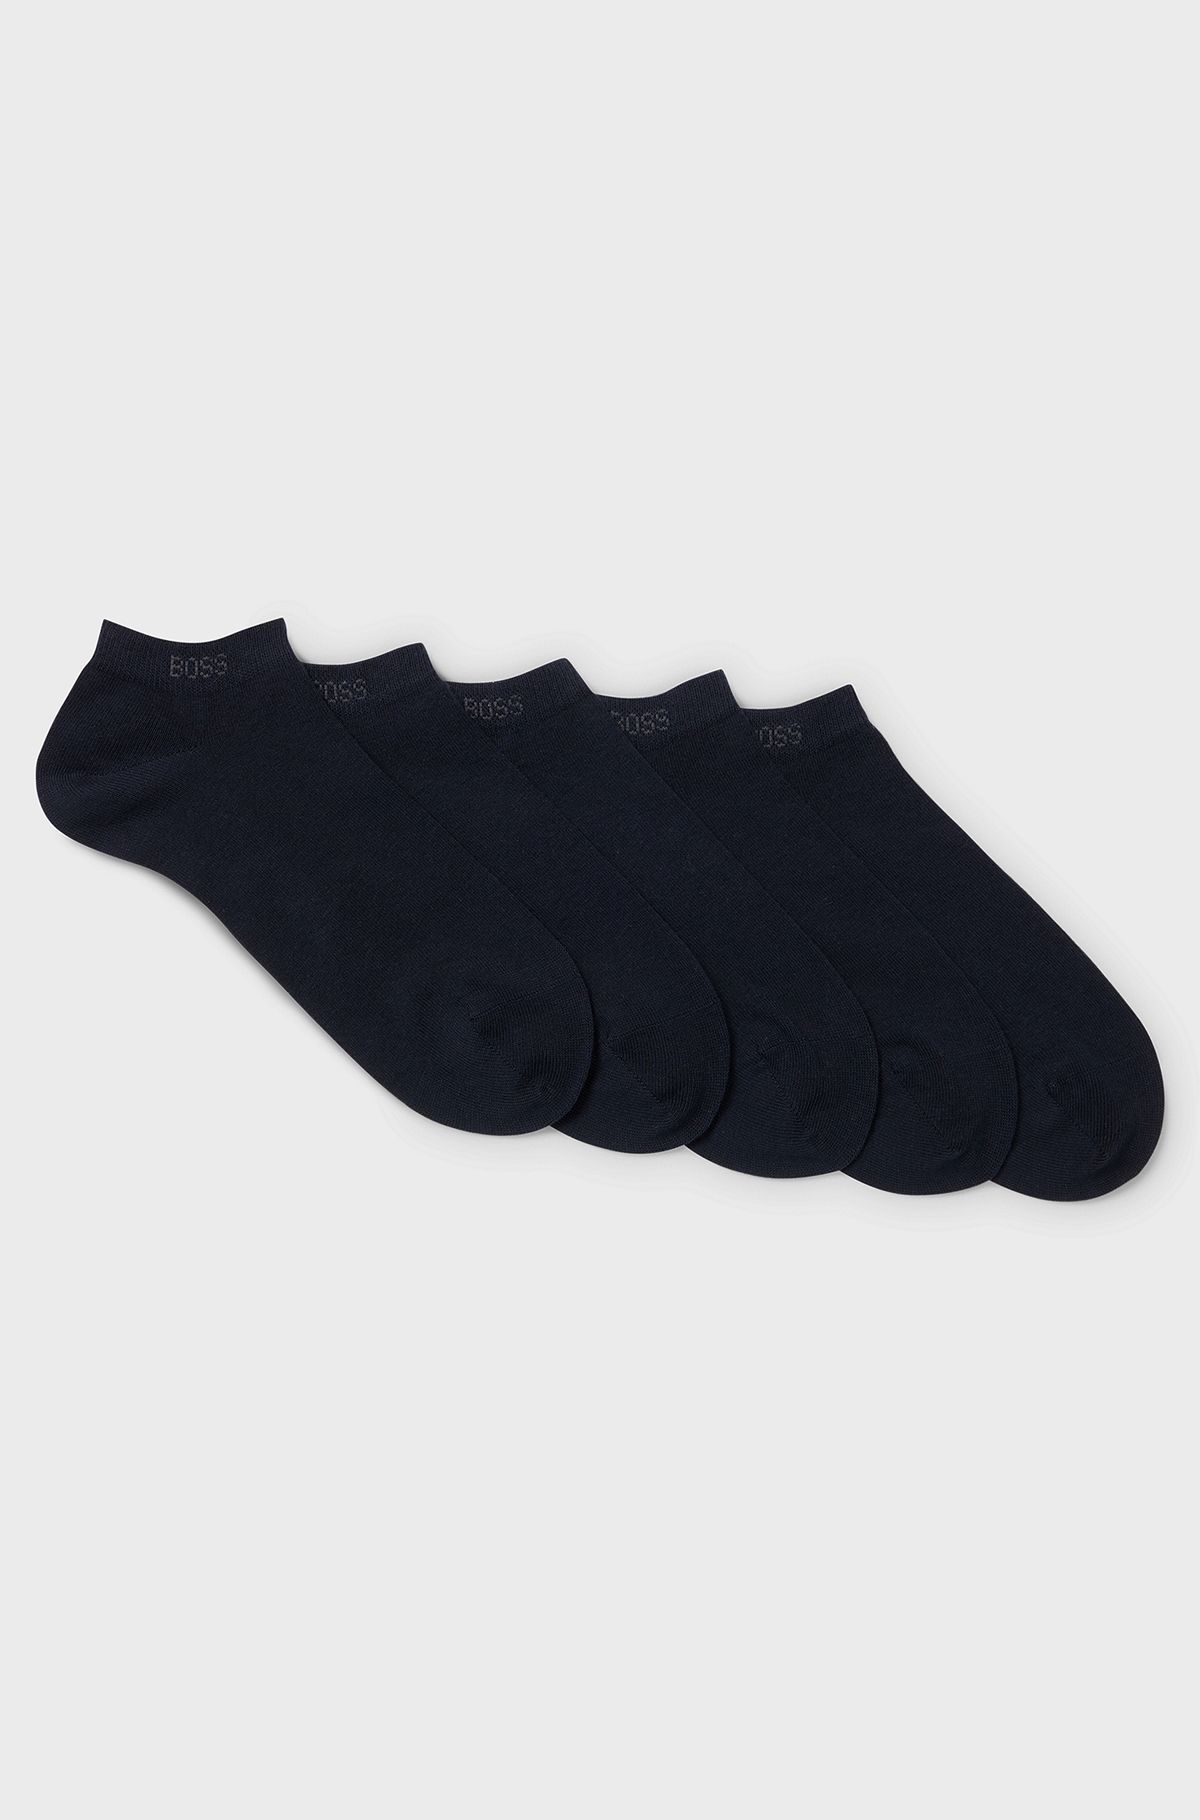 Five-pack of ankle socks in a cotton blend, Dark Blue